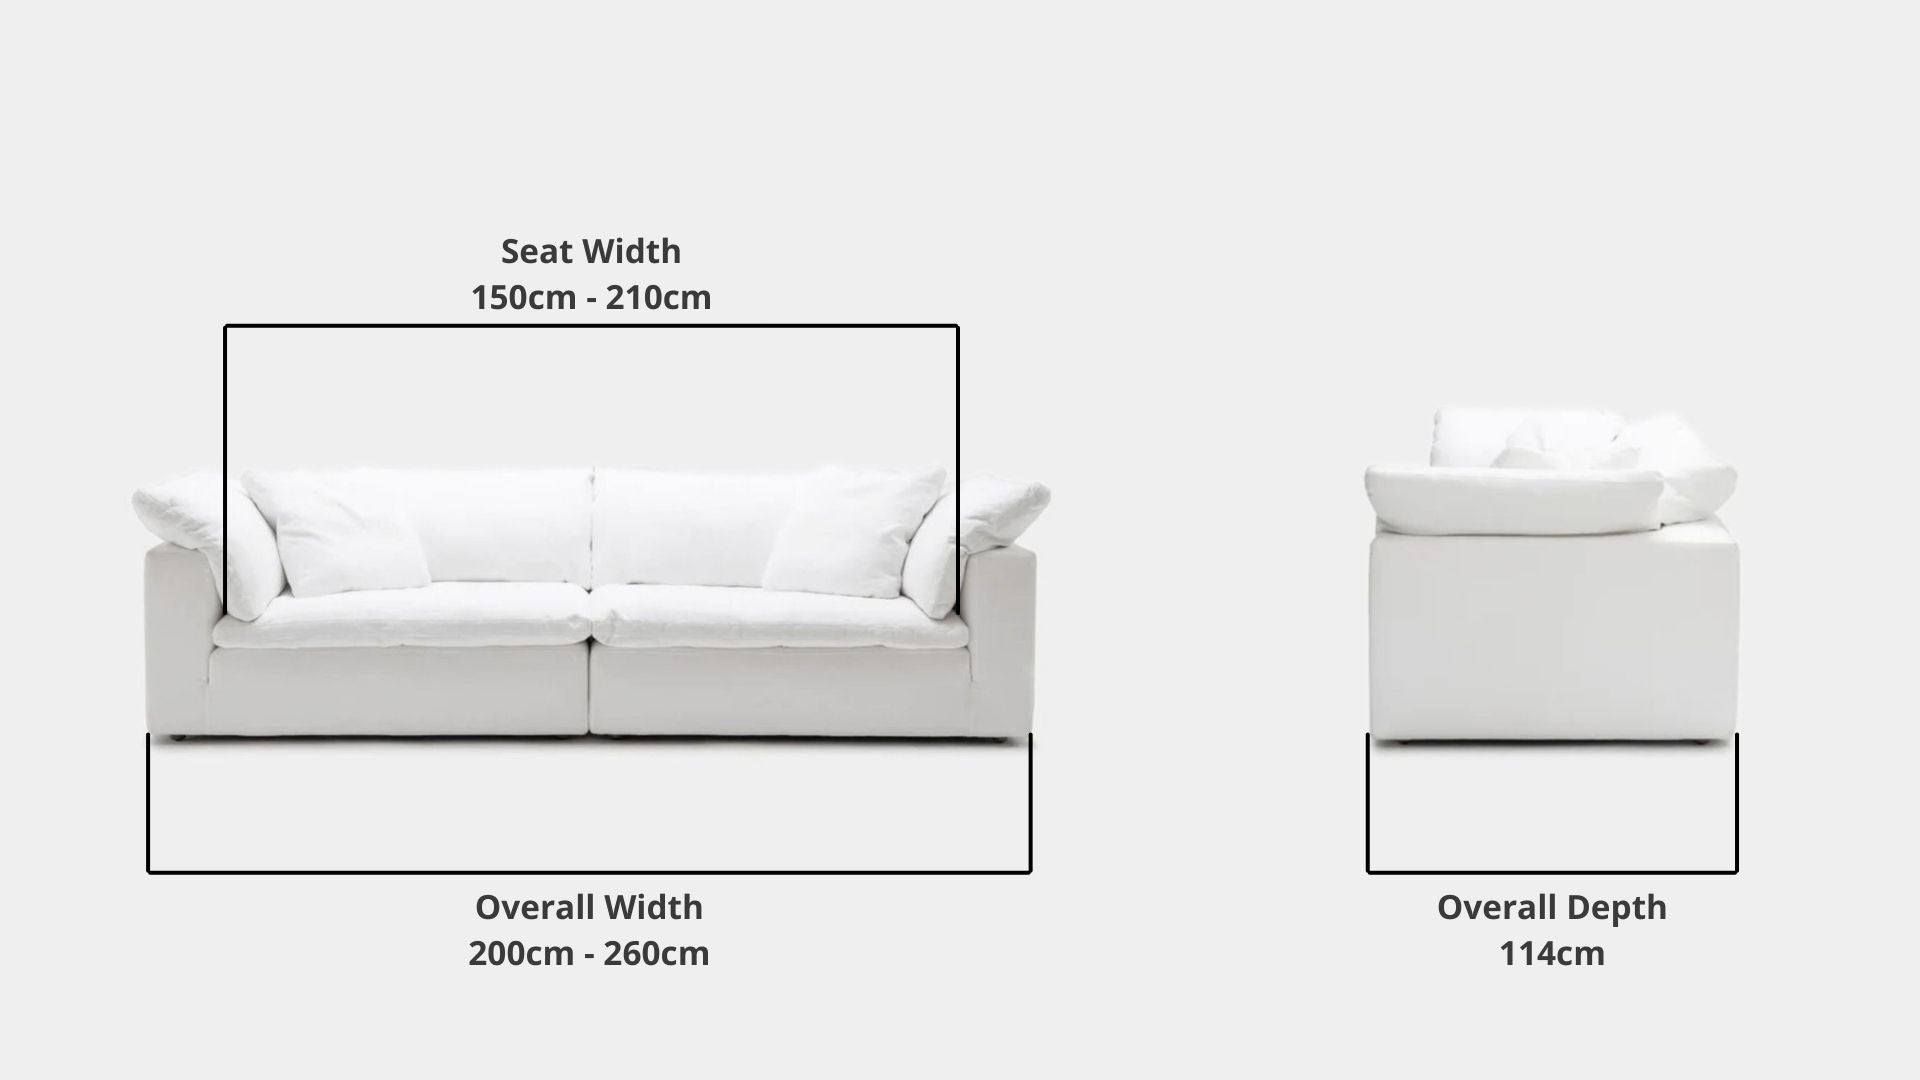 Details the key dimensions in terms of overall width, overall depth and seat width for Cloud Fabric Sofa